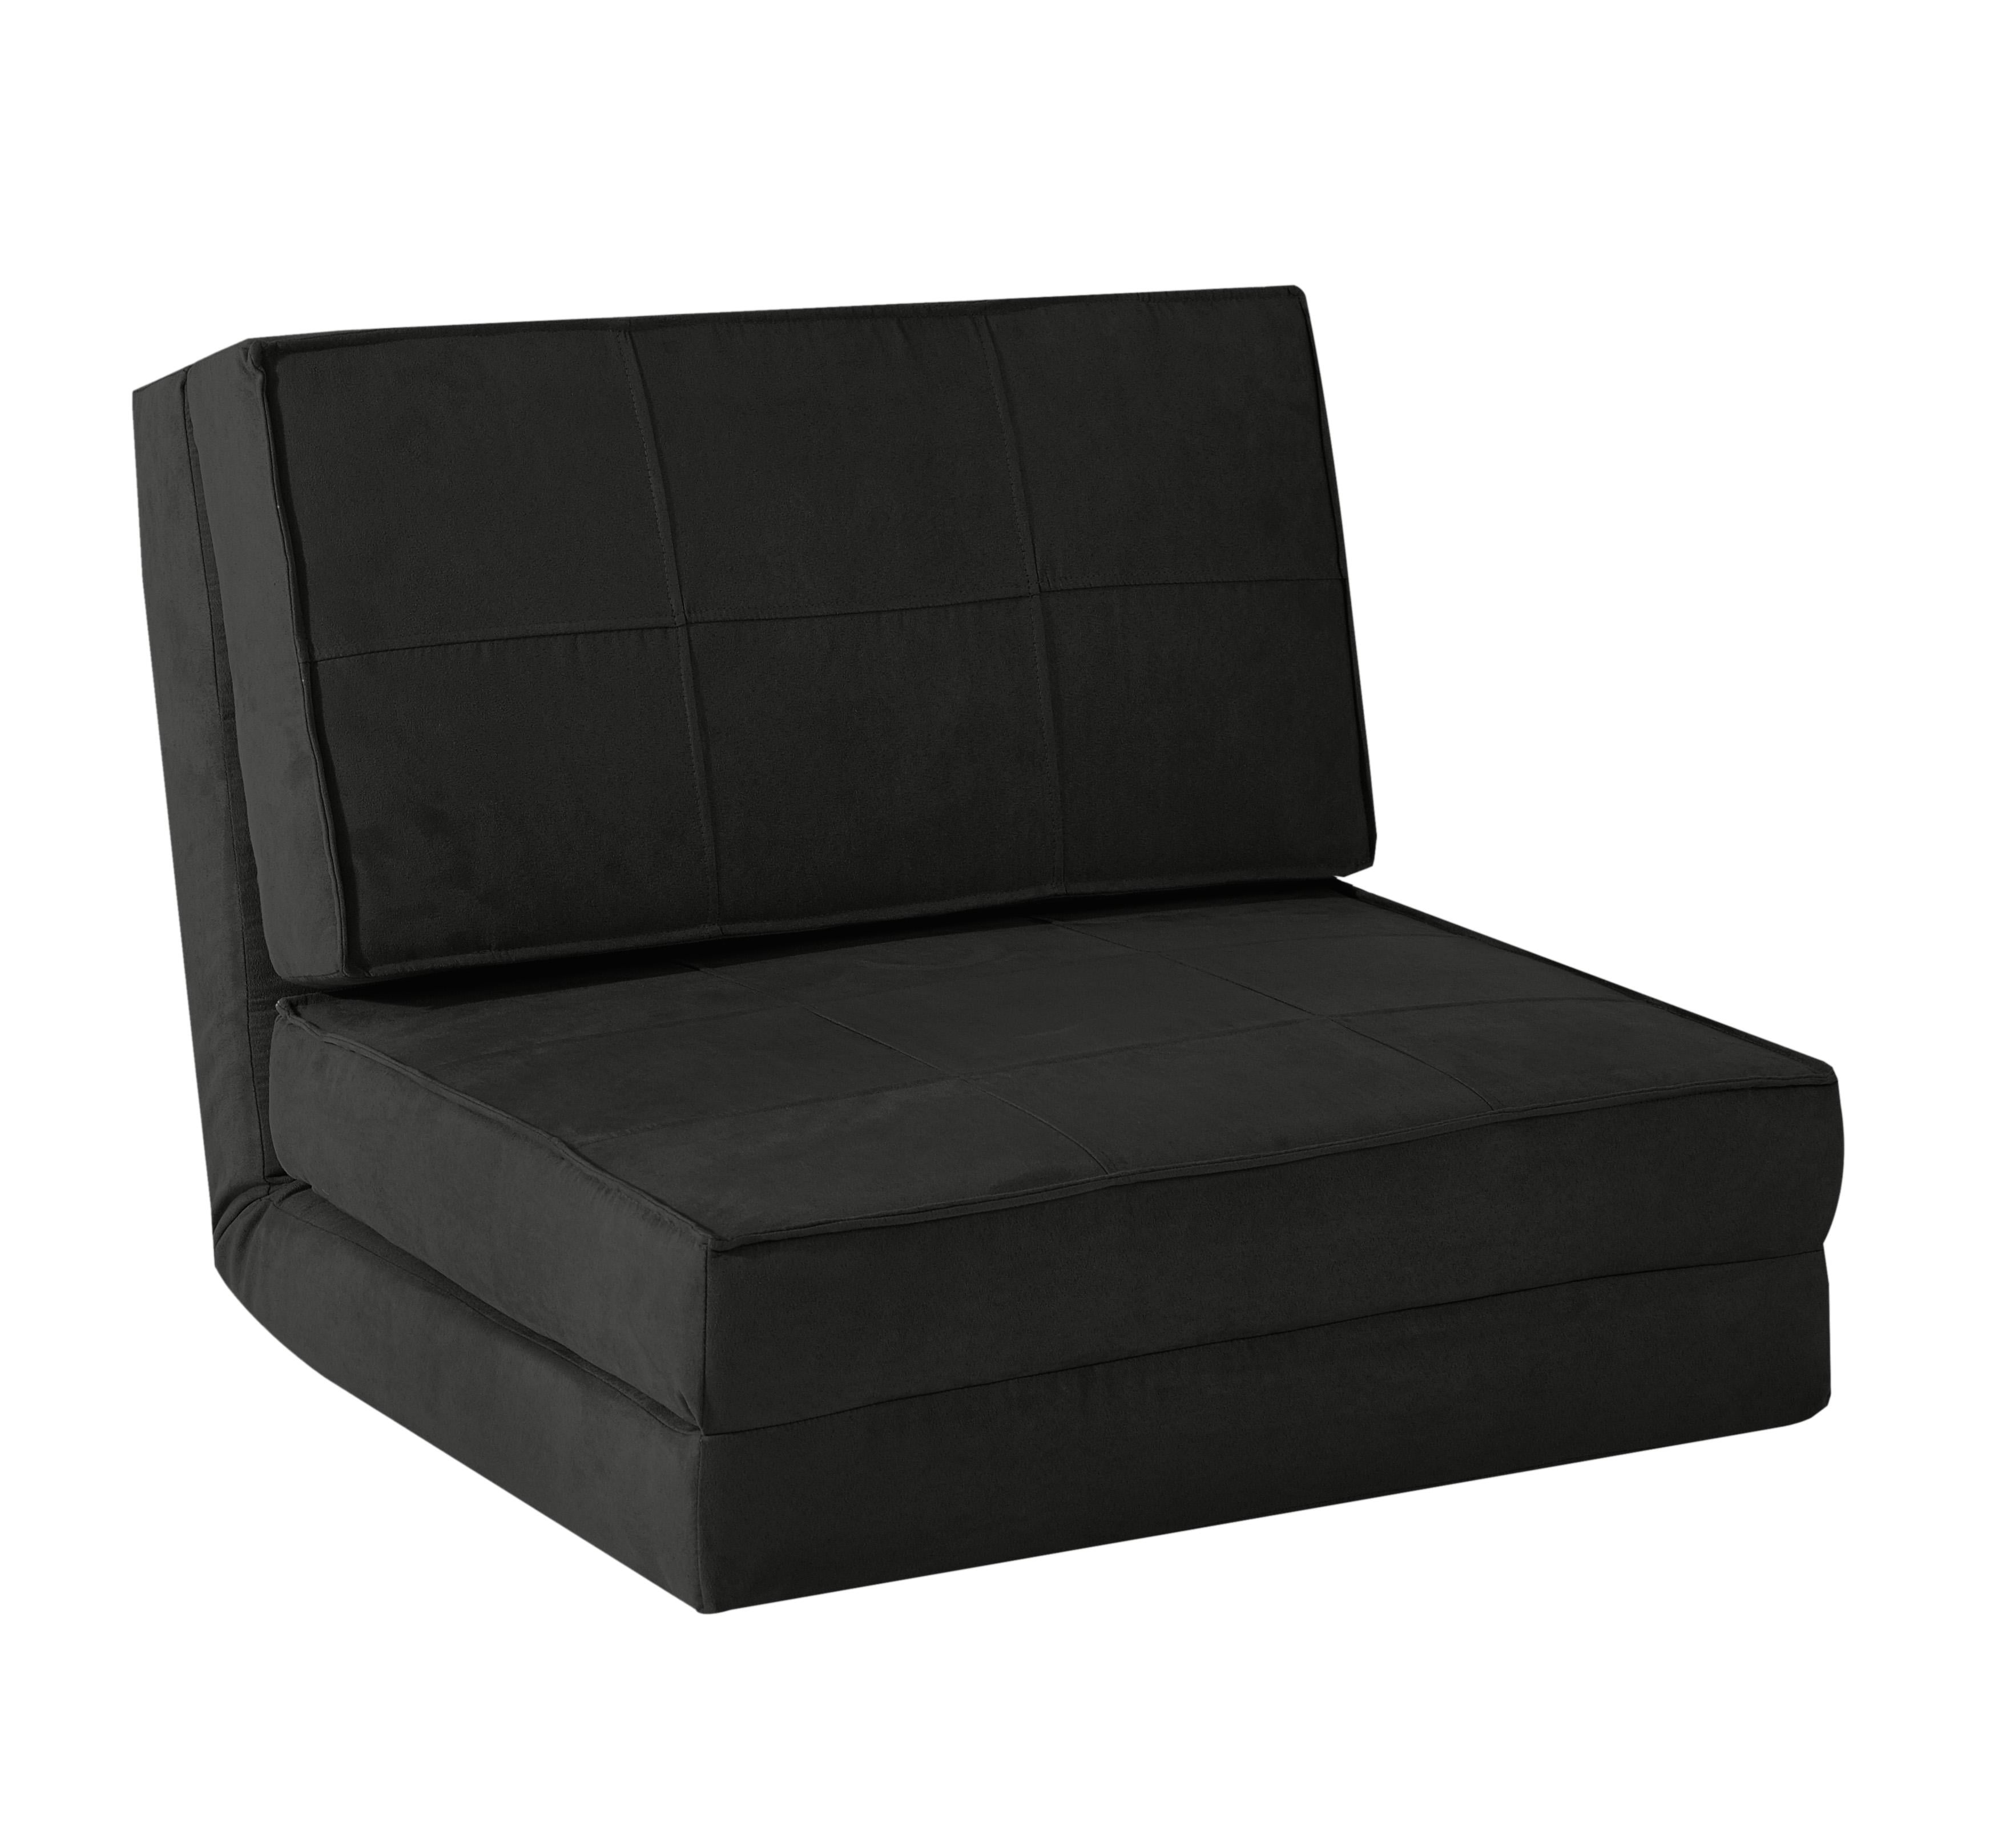 Your Zone Ultra Soft Suede 3 Position Convertible Flip Lounge Chair, Black - Walmart.com